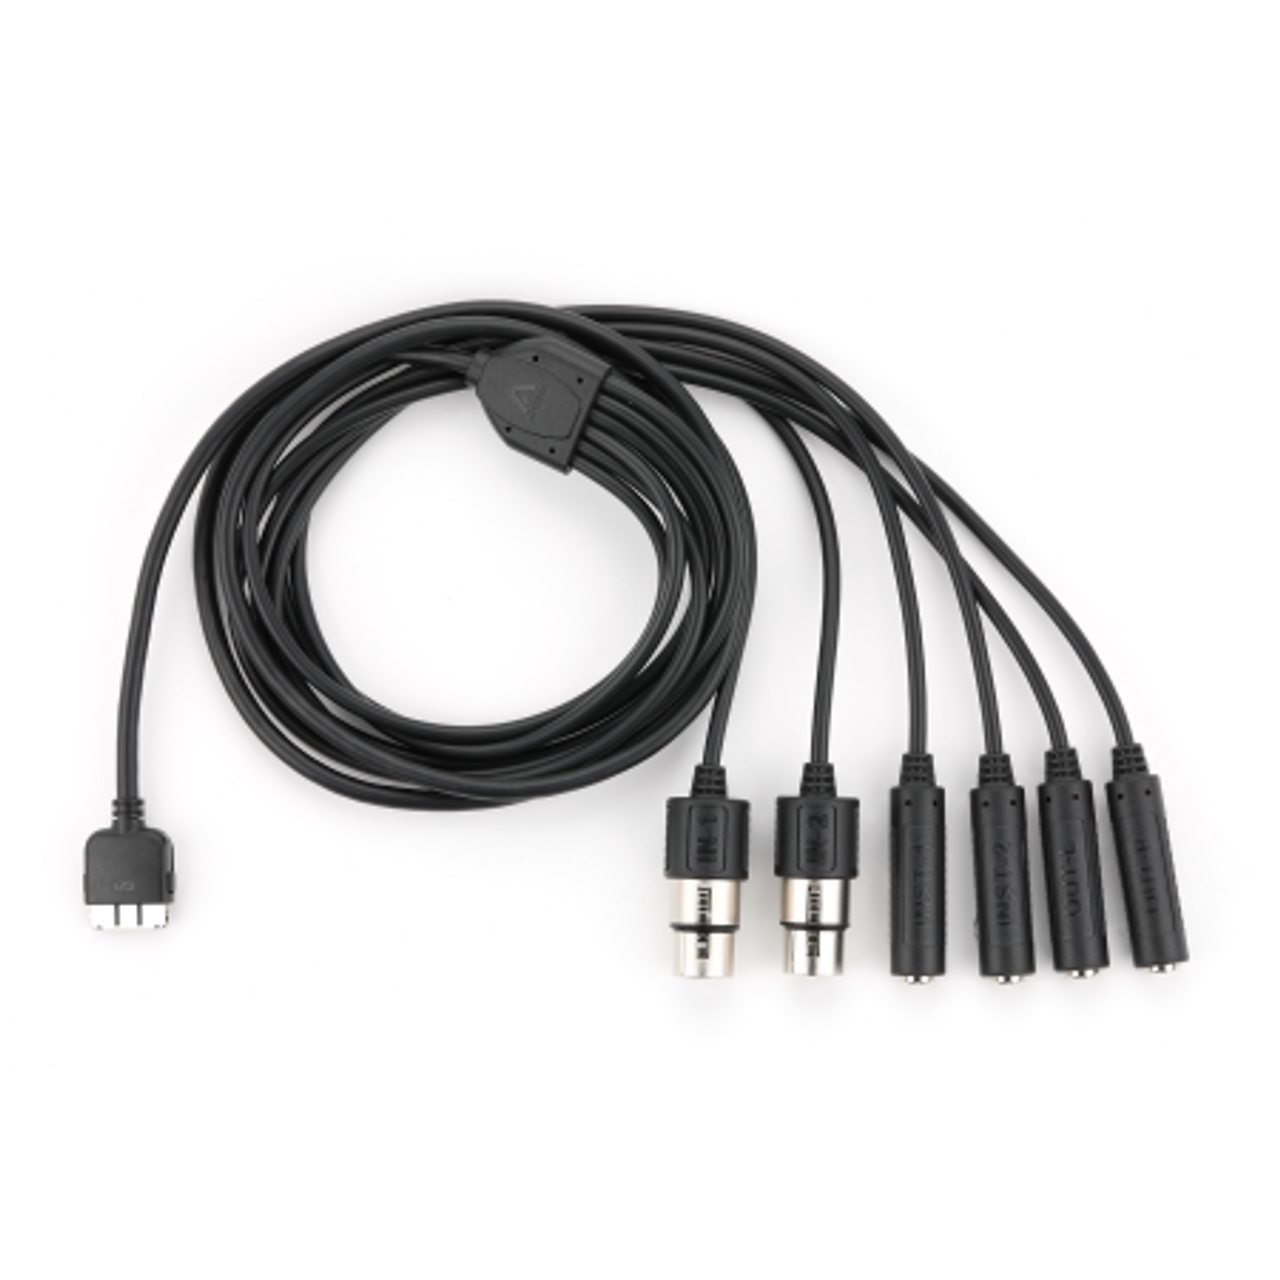 Apogee Replacement breakout cable for Duet 3